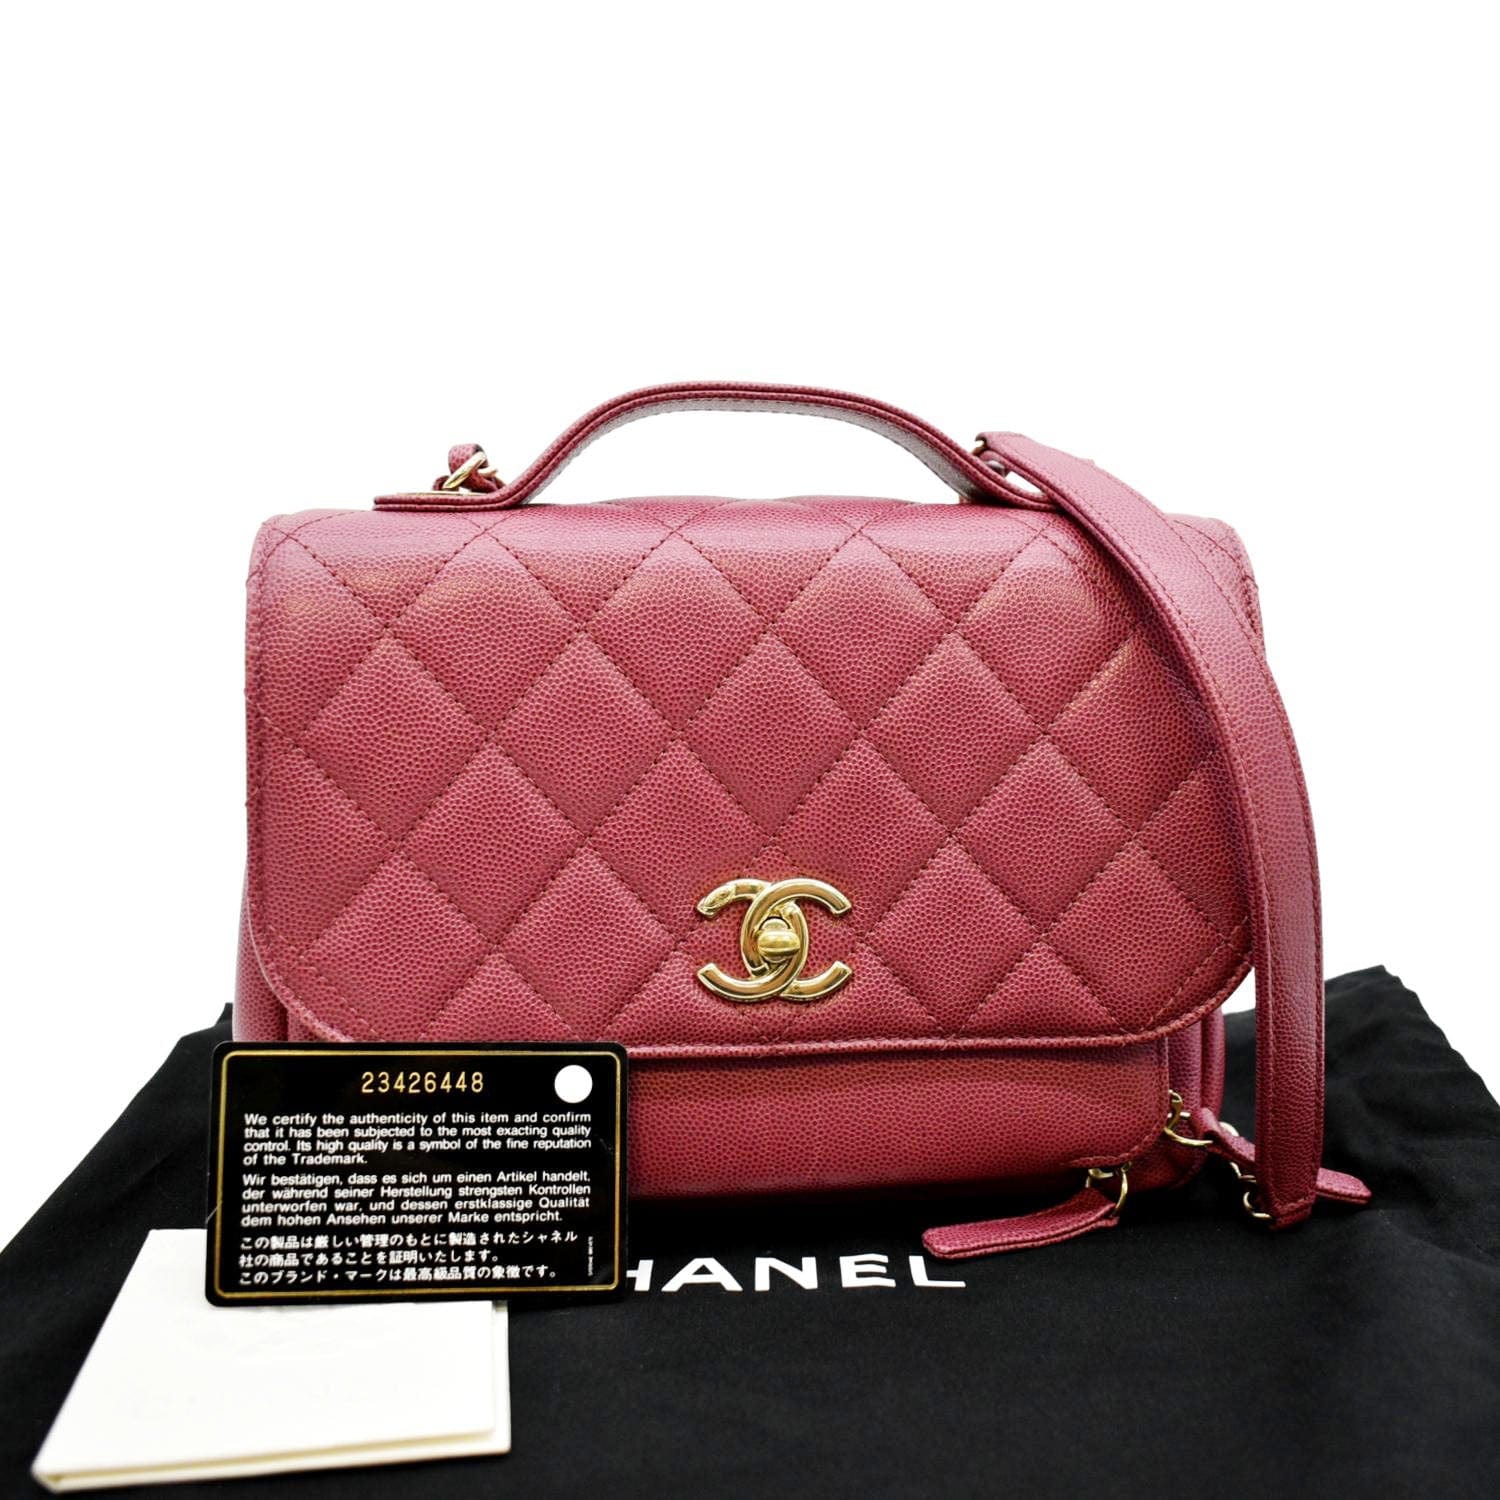 Business affinity leather handbag Chanel Pink in Leather - 26300331